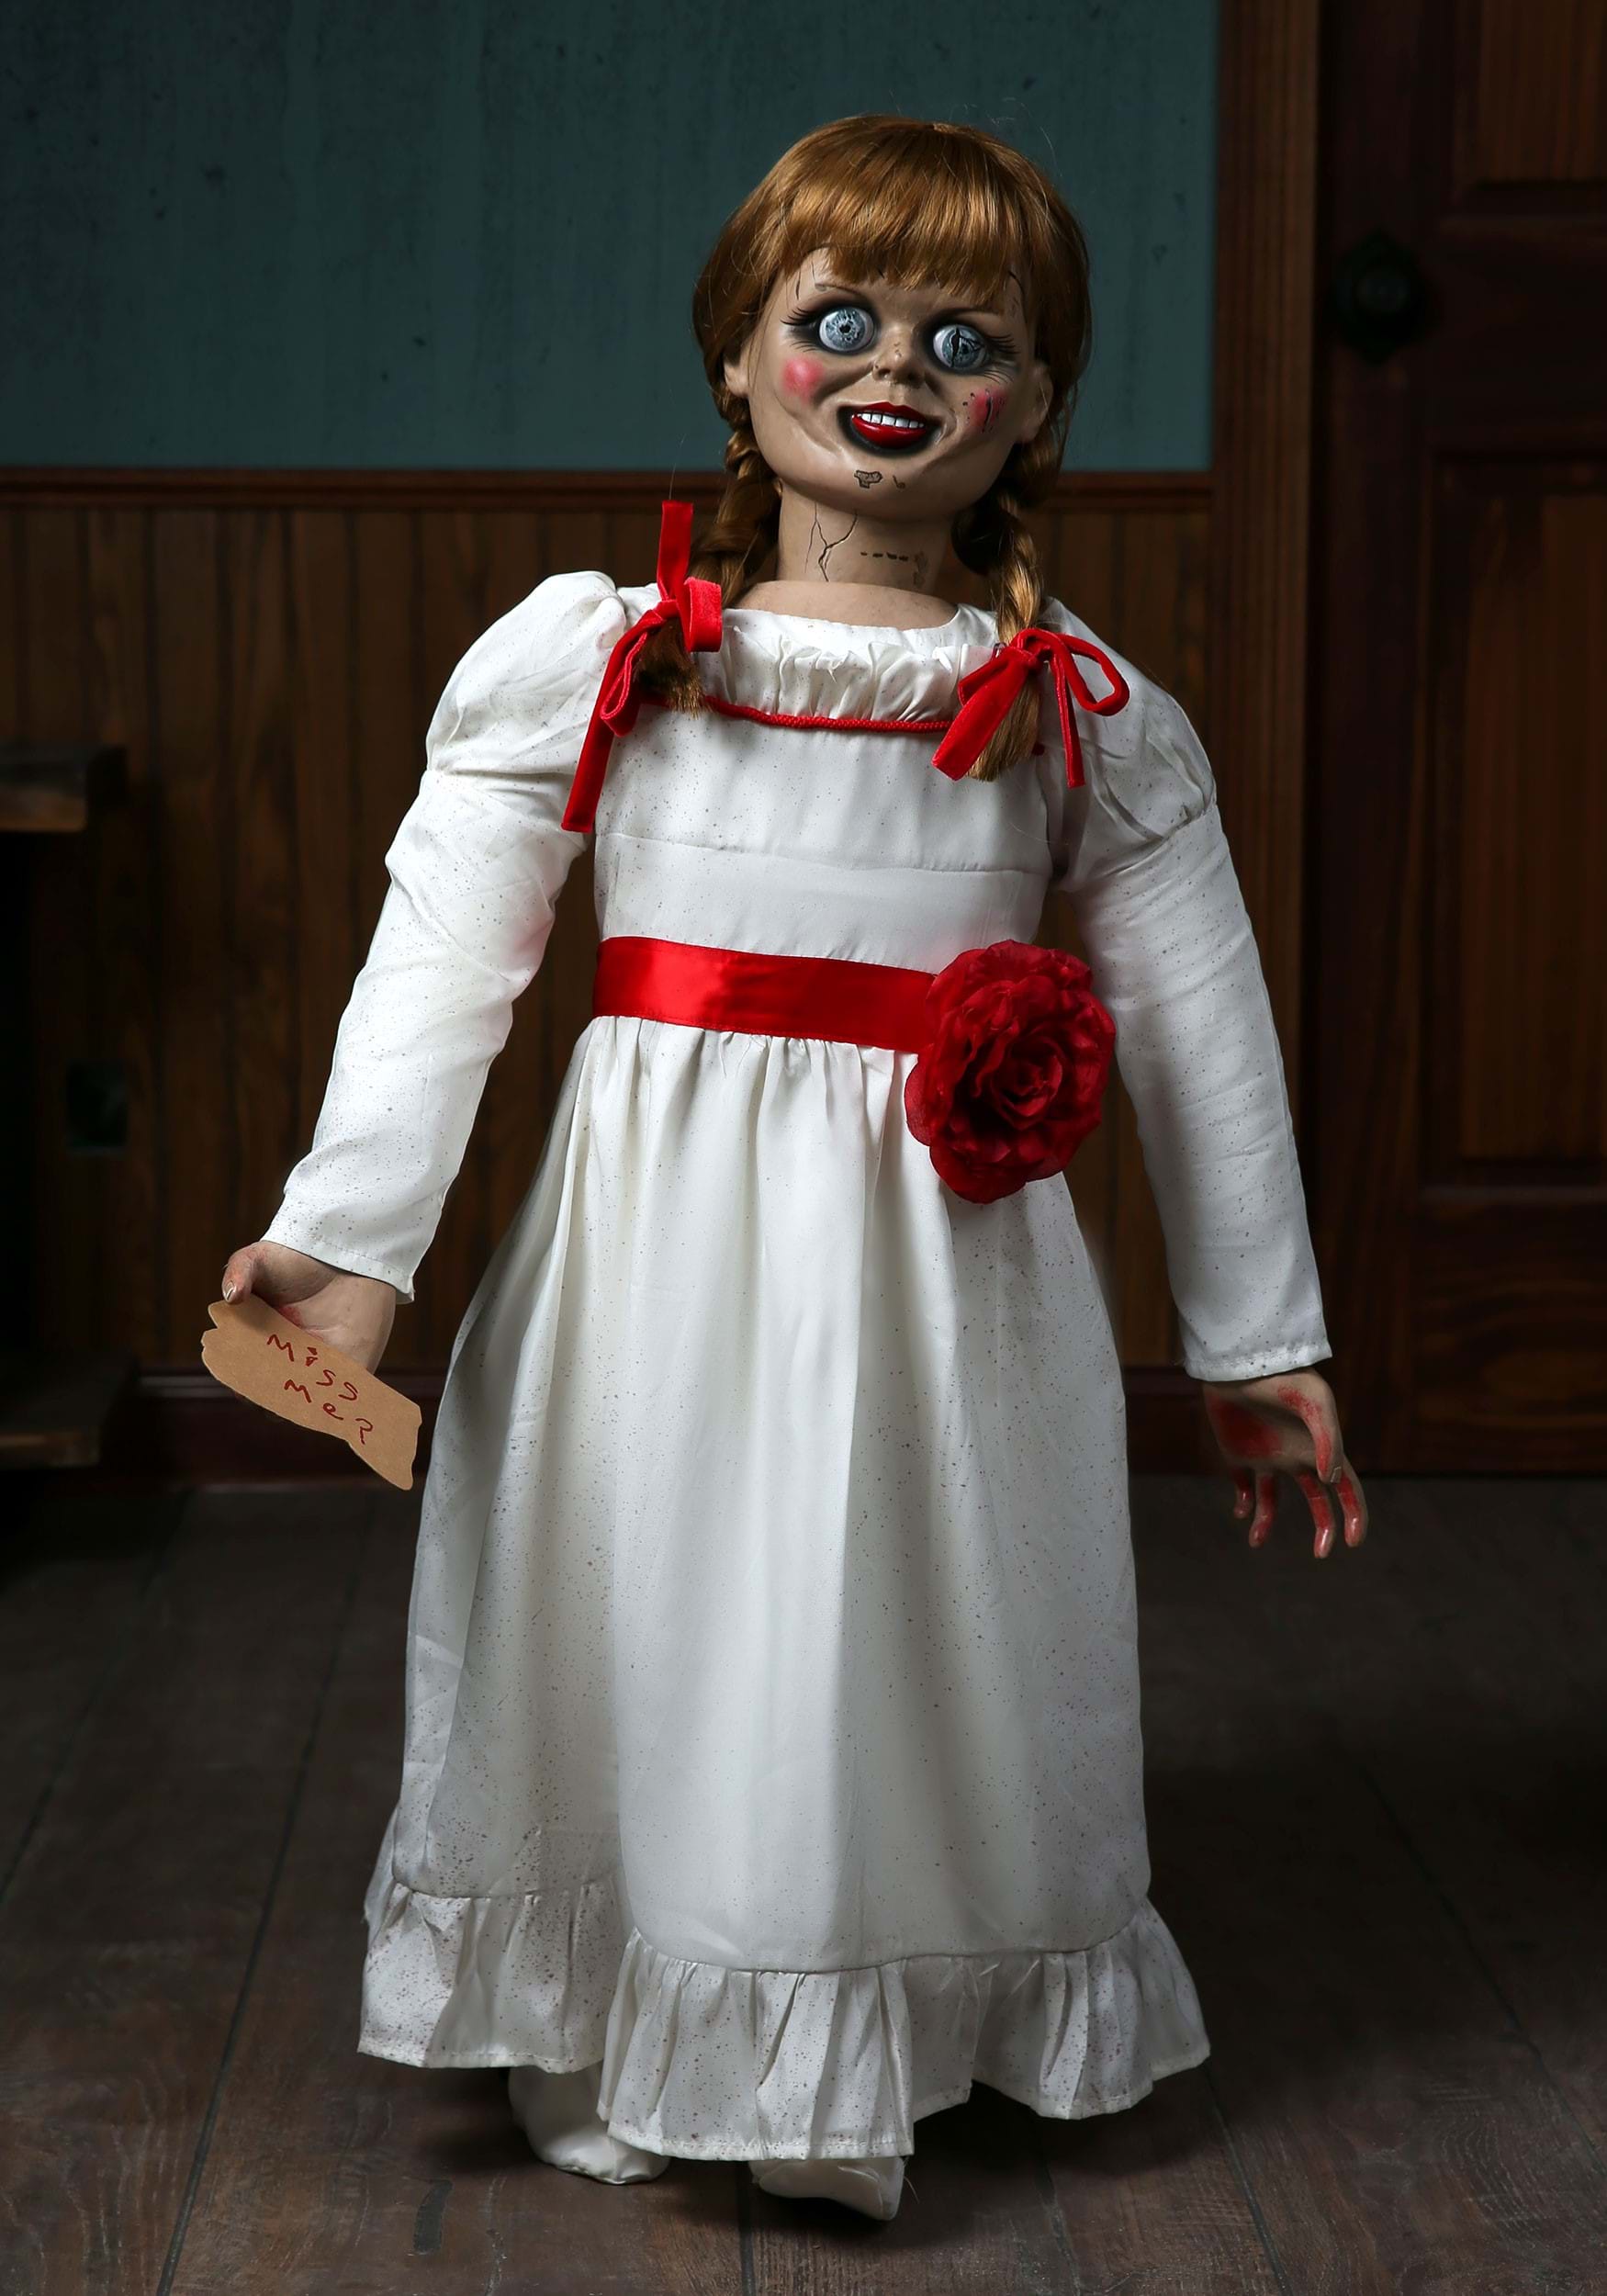 The Conjuring Collector’s Annabelle Doll Prop